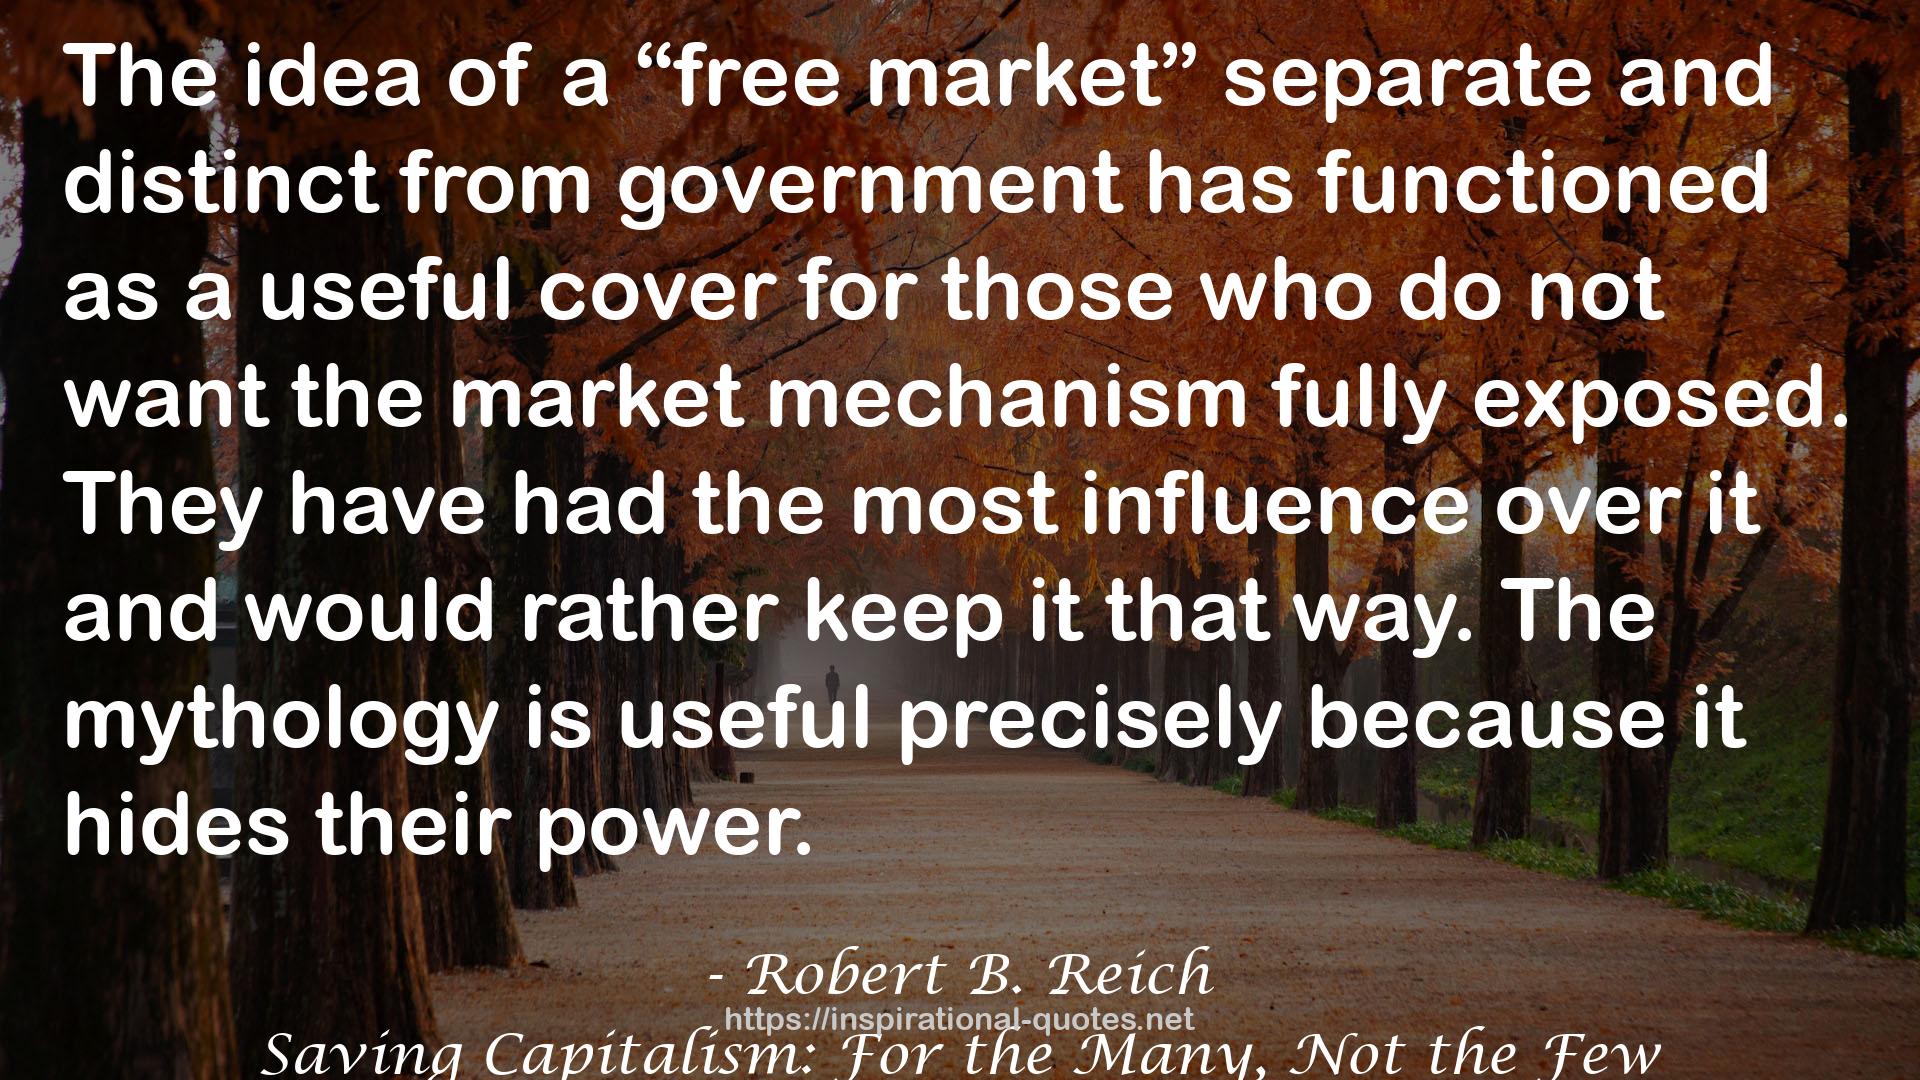 Saving Capitalism: For the Many, Not the Few QUOTES